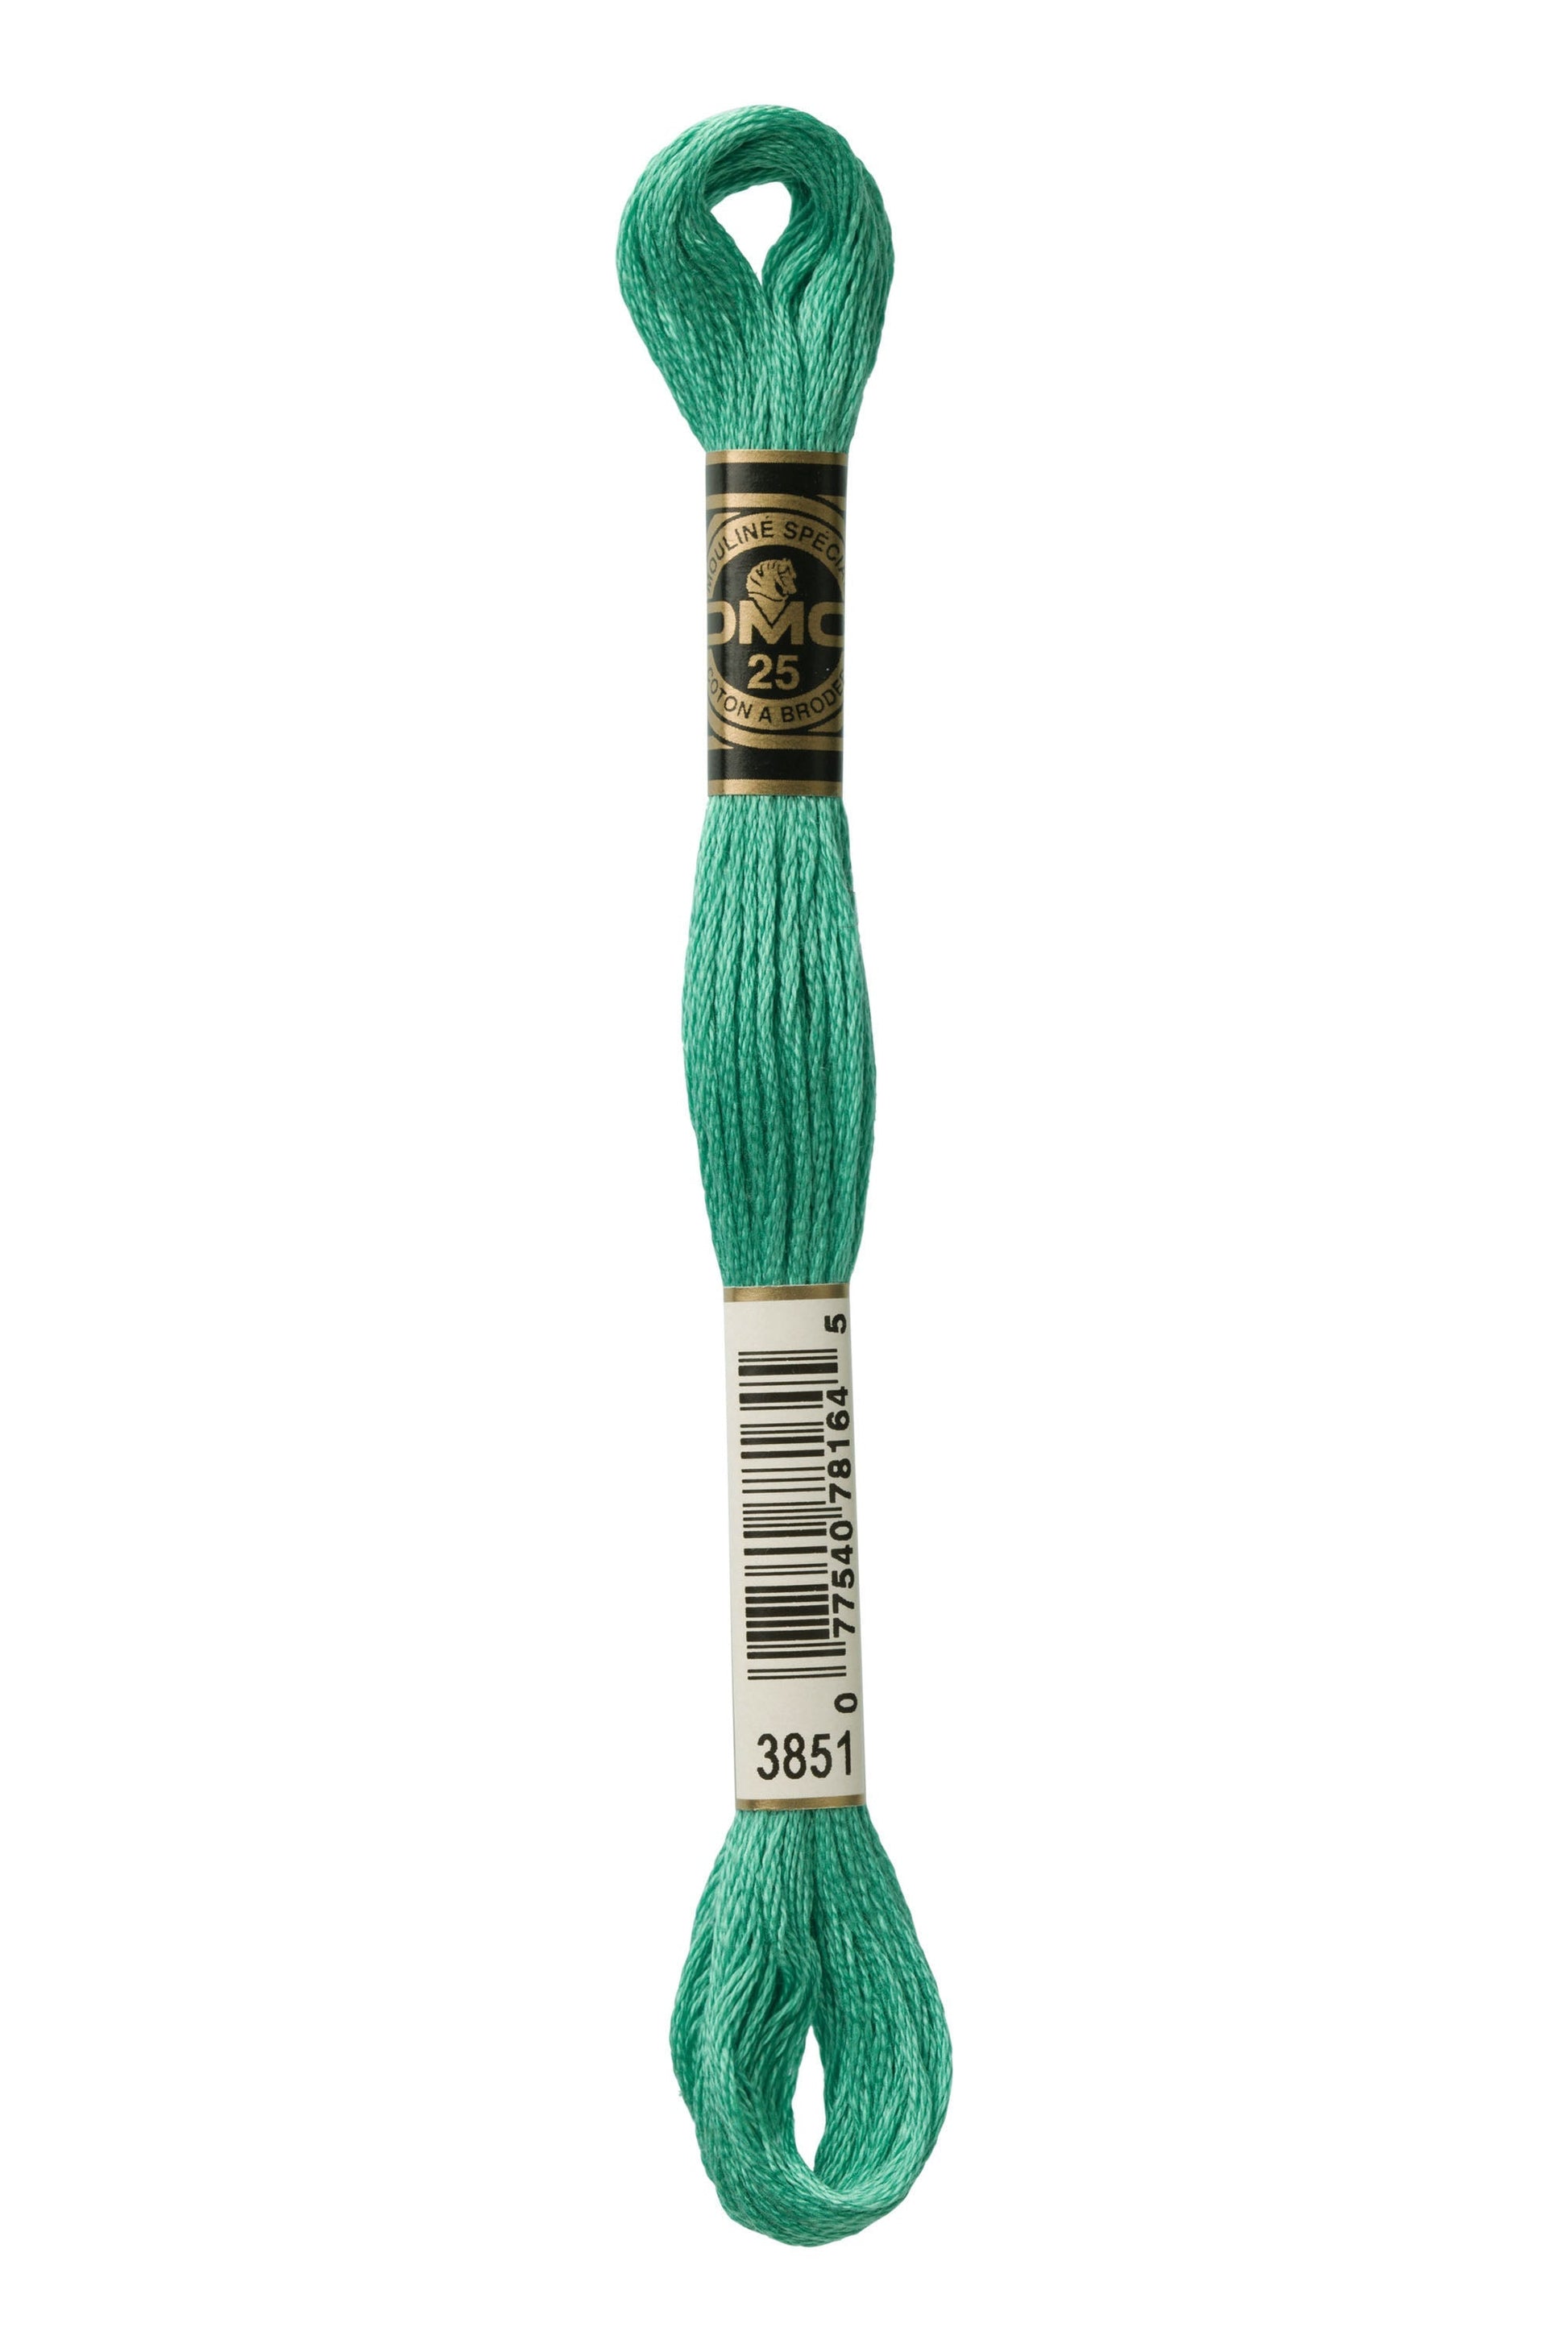 Six-Strand Embroidery Floss - 3851 (Emerald Shard)-Embroidery Thread-Wild and Woolly Yarns